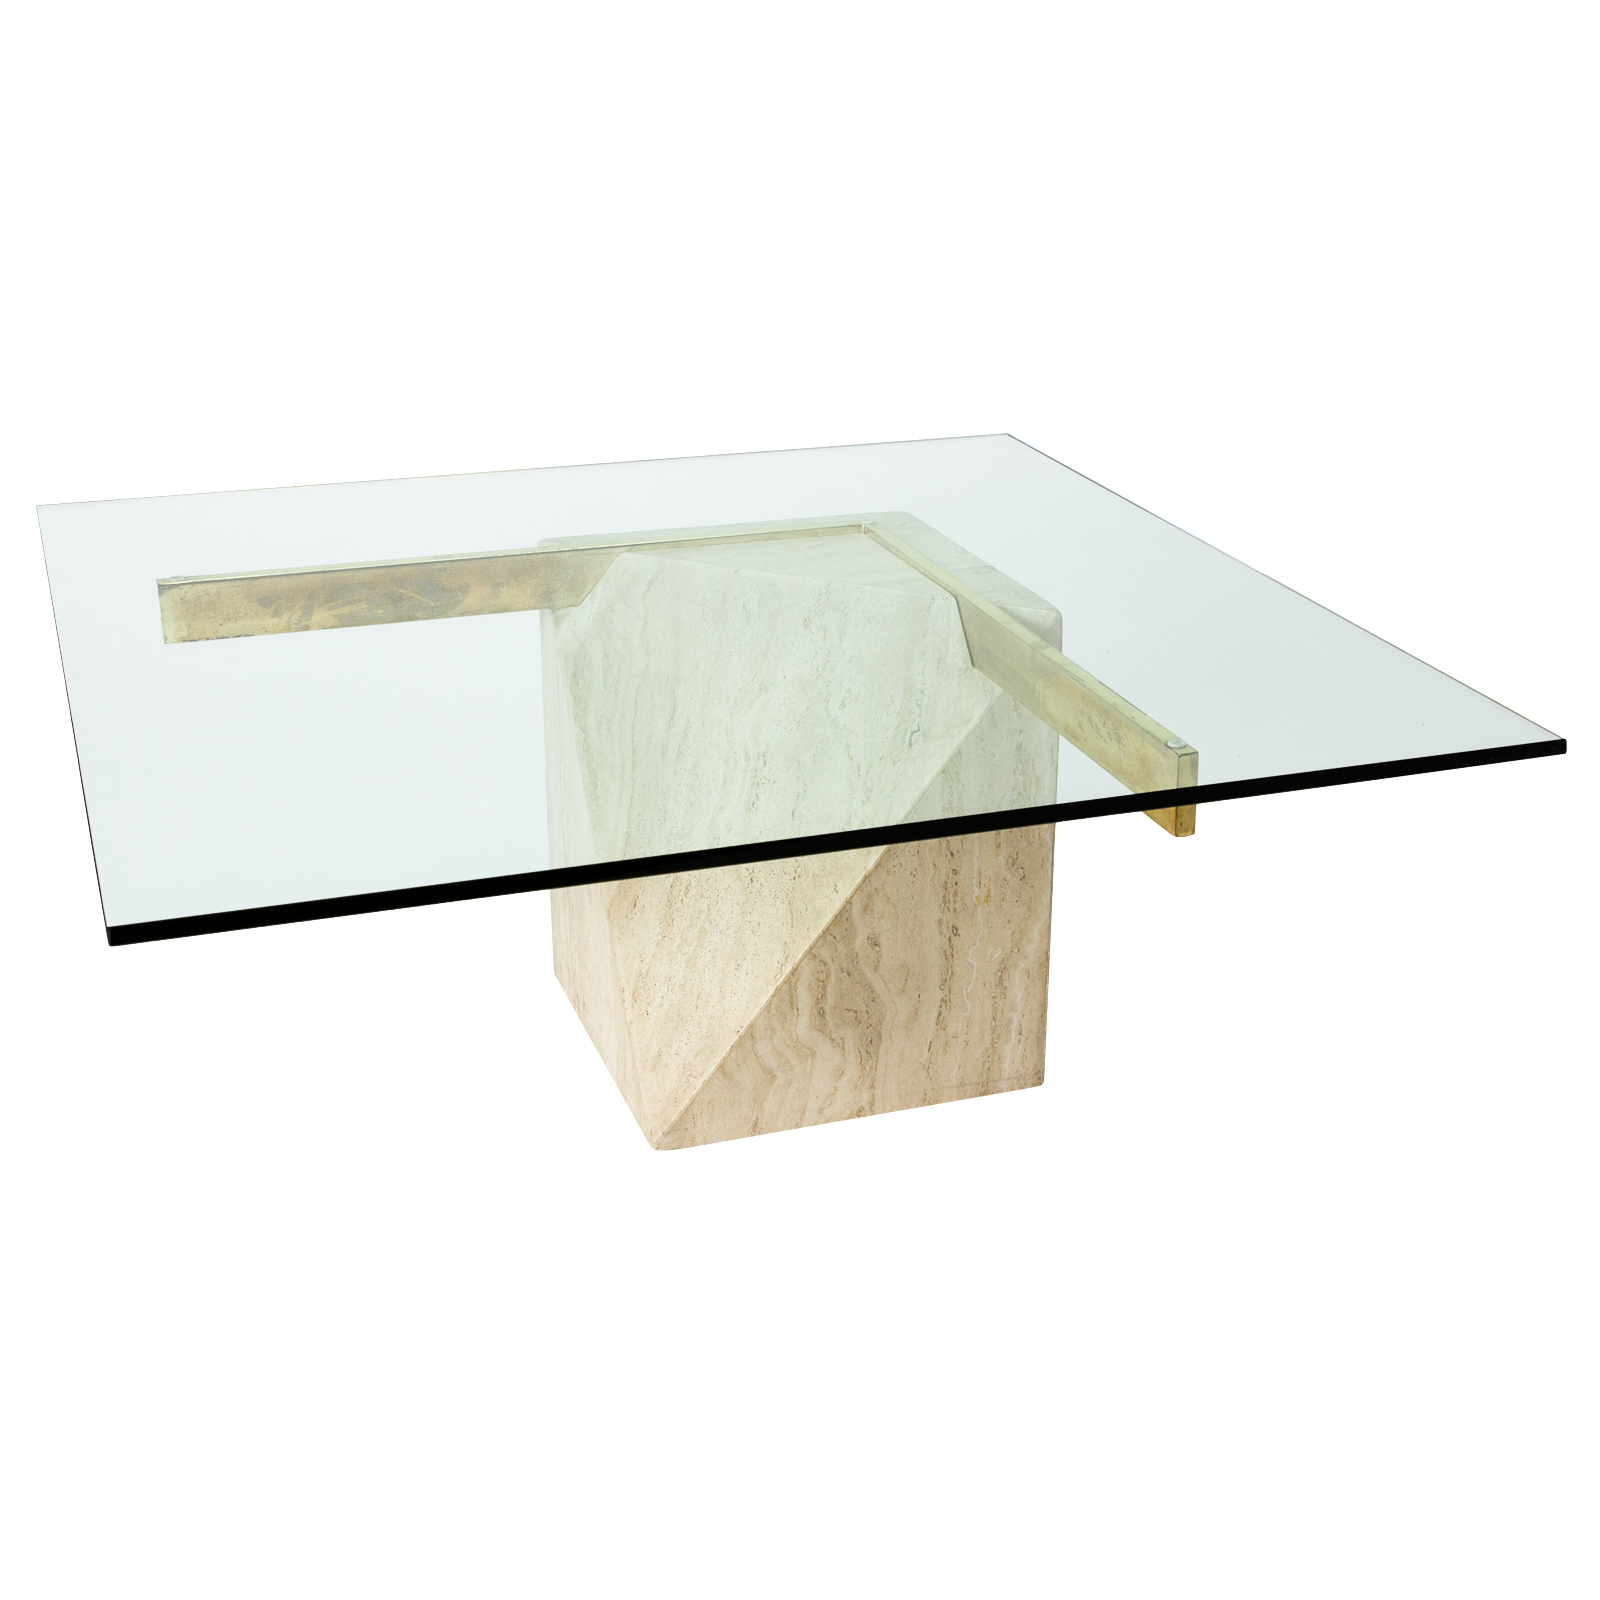 Marble Coffee Table Rentals | Event Furniture Rentals | FormDecor